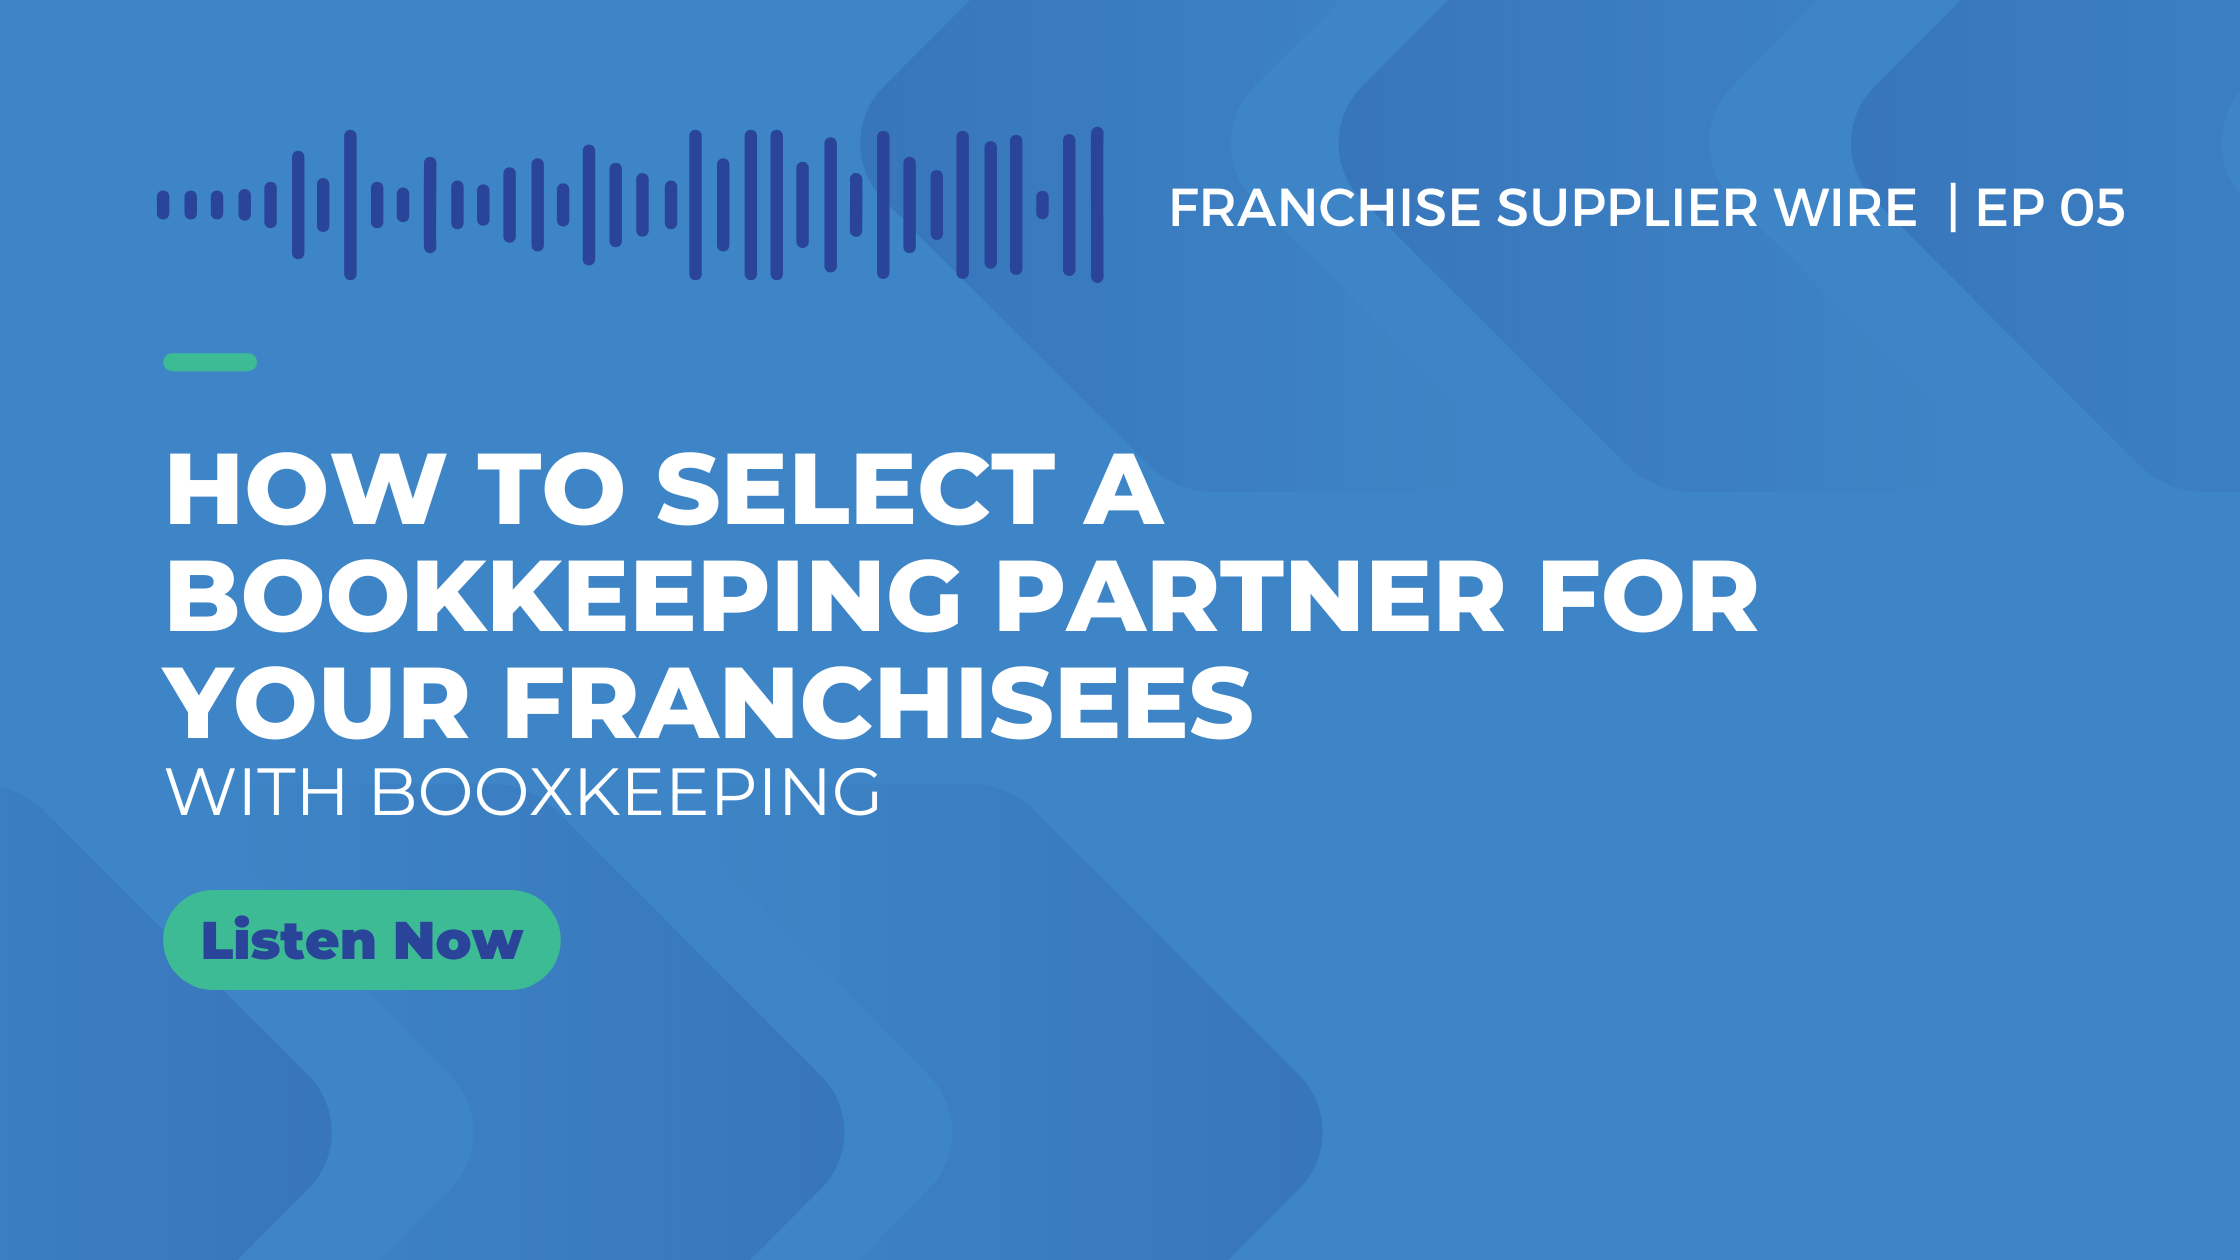 How To Select A Bookkeeping Partner For Your Franchisees